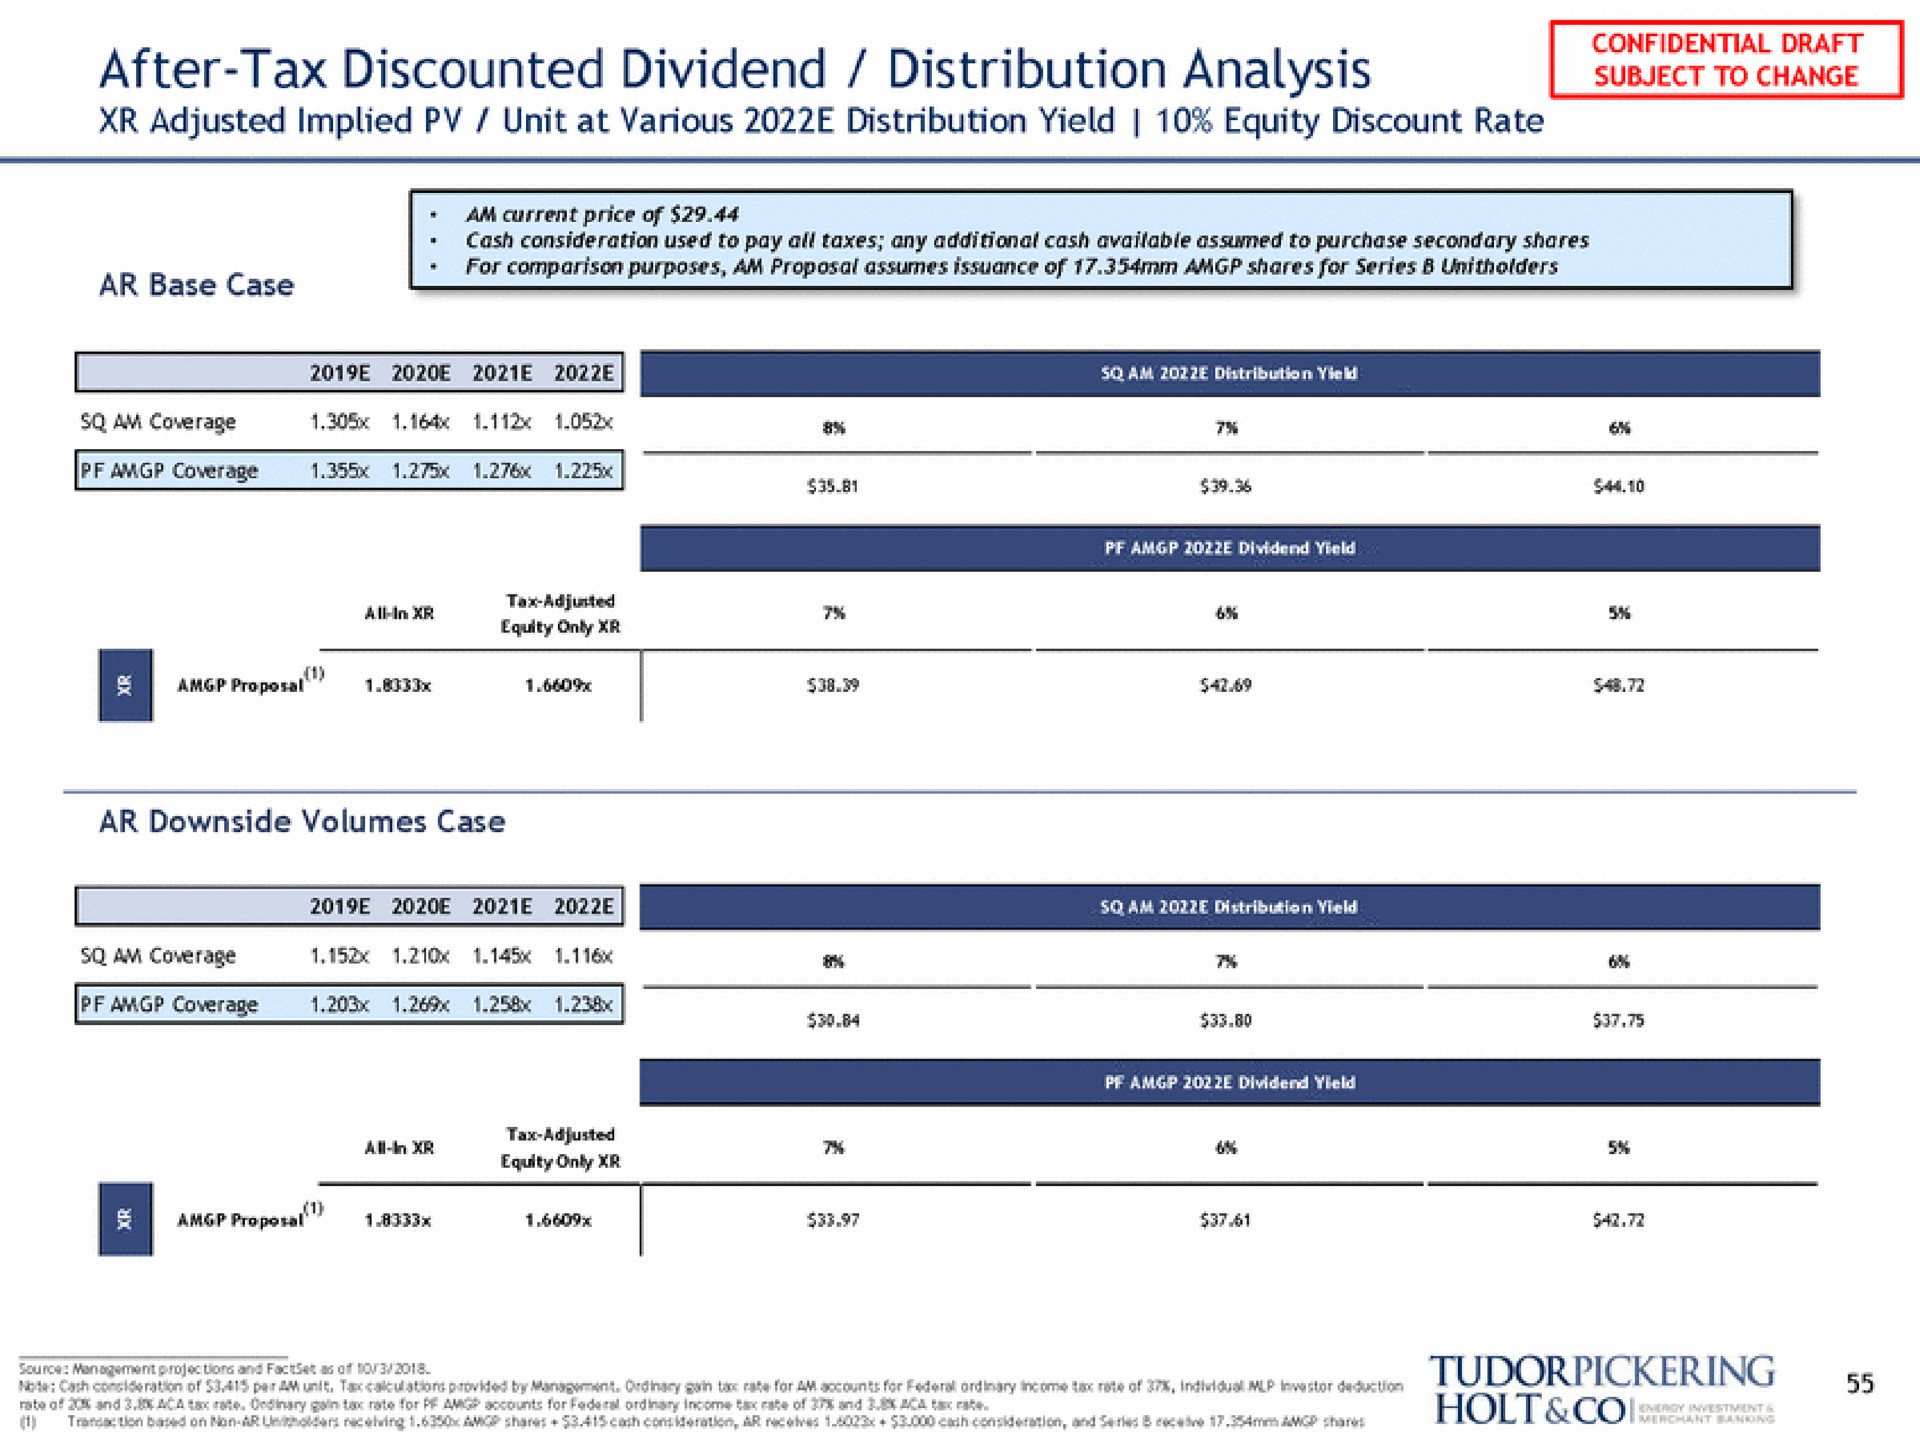 after tax discounted dividend distribution analysis | Tudor, Pickering, Holt & Co